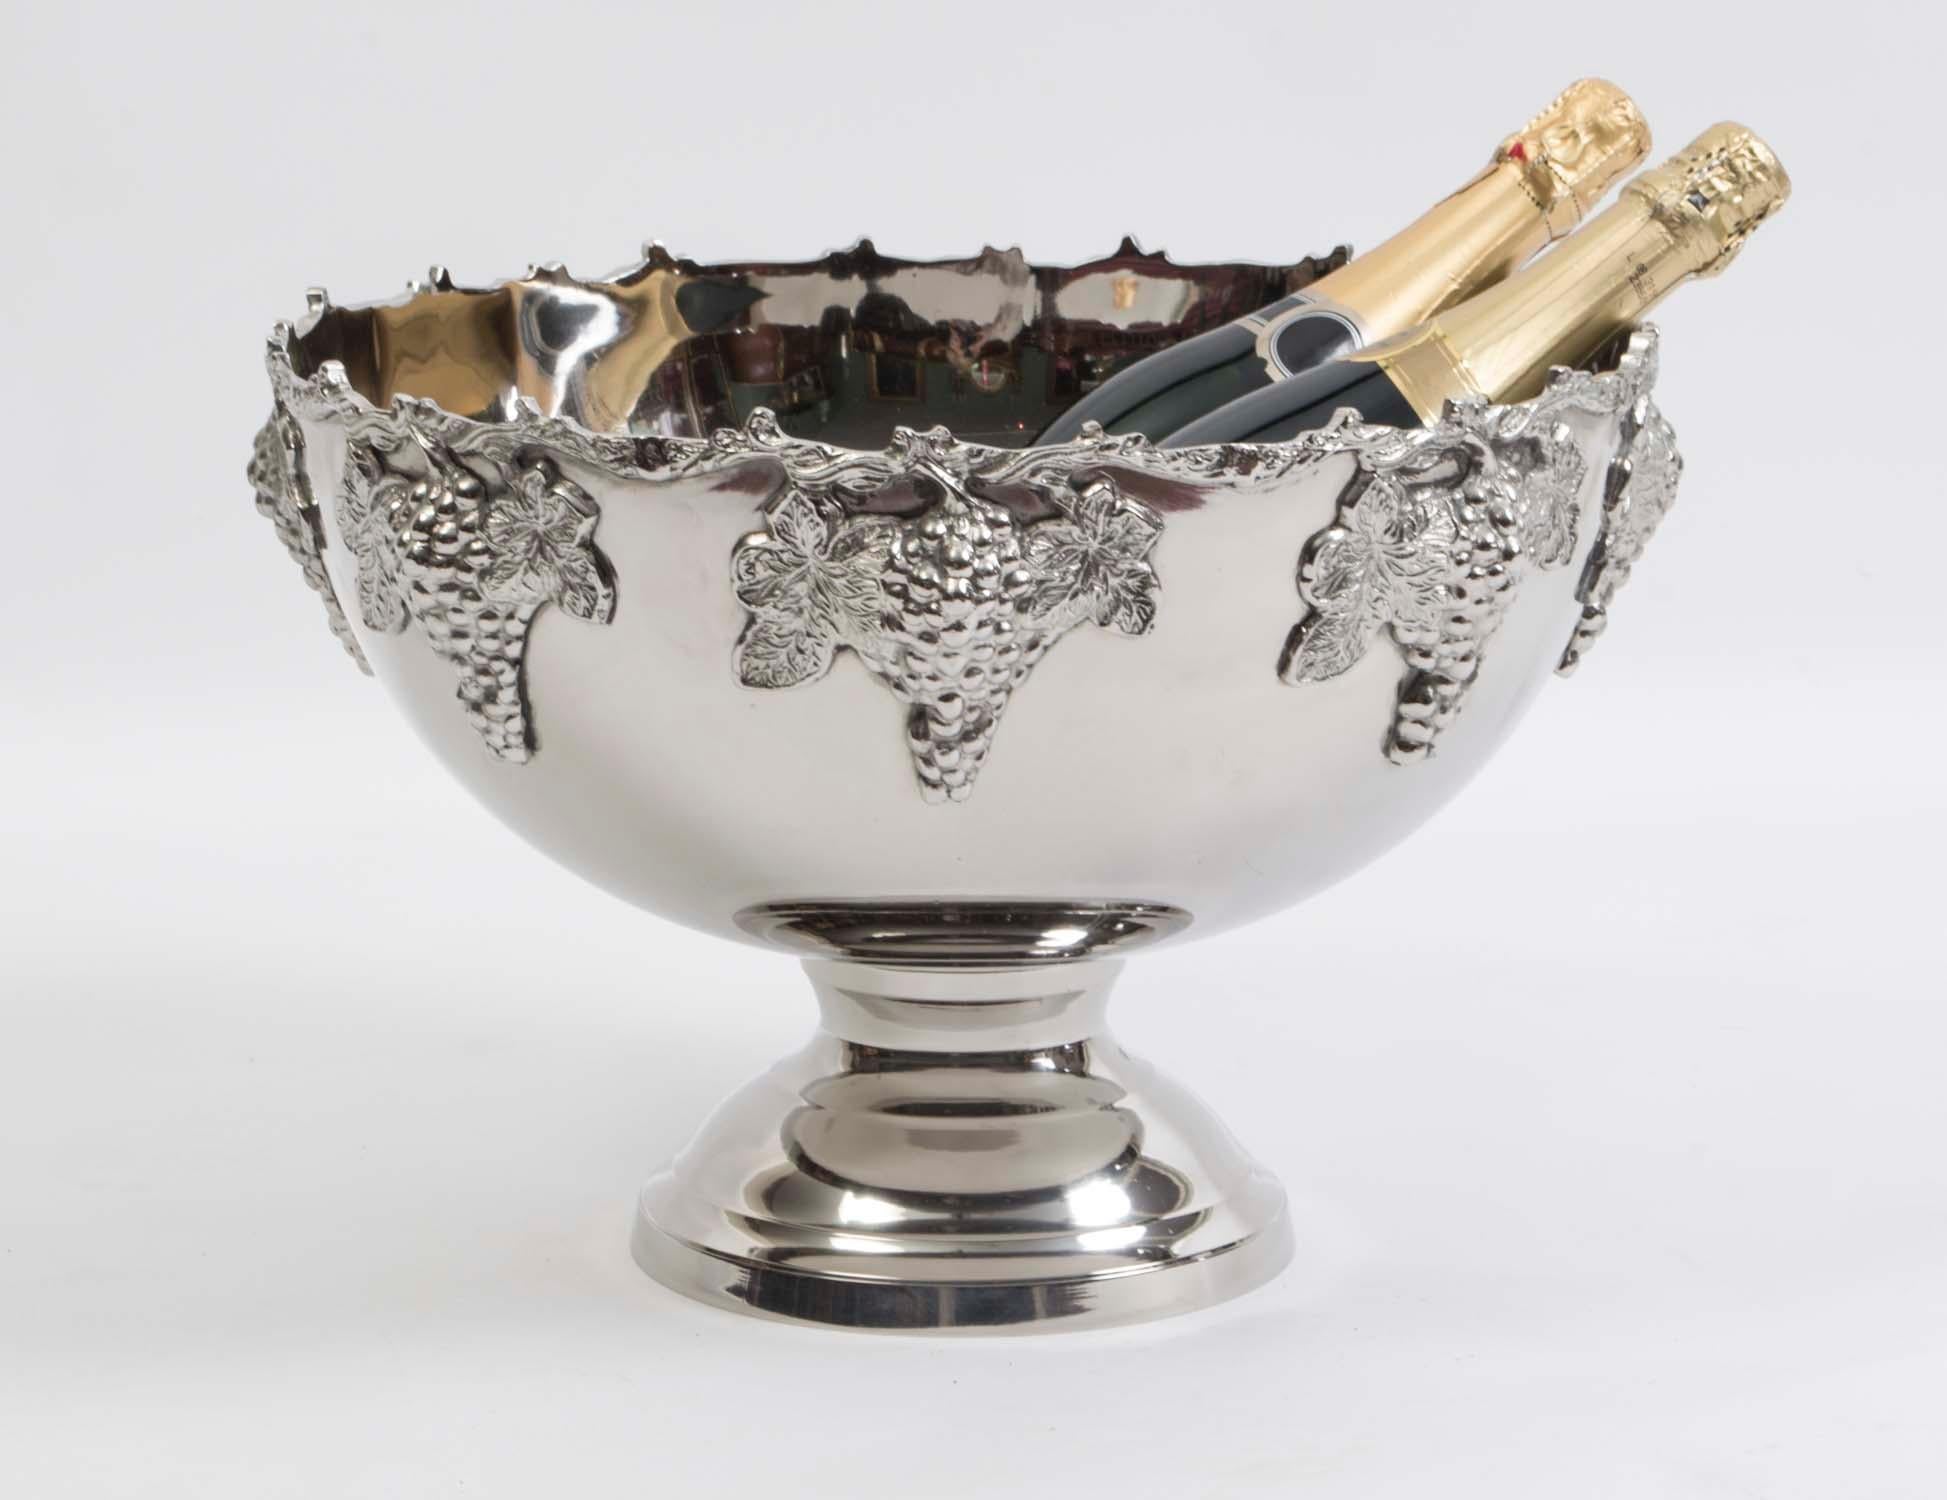 Vintage Silver Plated Monteith Punch Bowl Champagne Cooler 20th Century For Sale 4